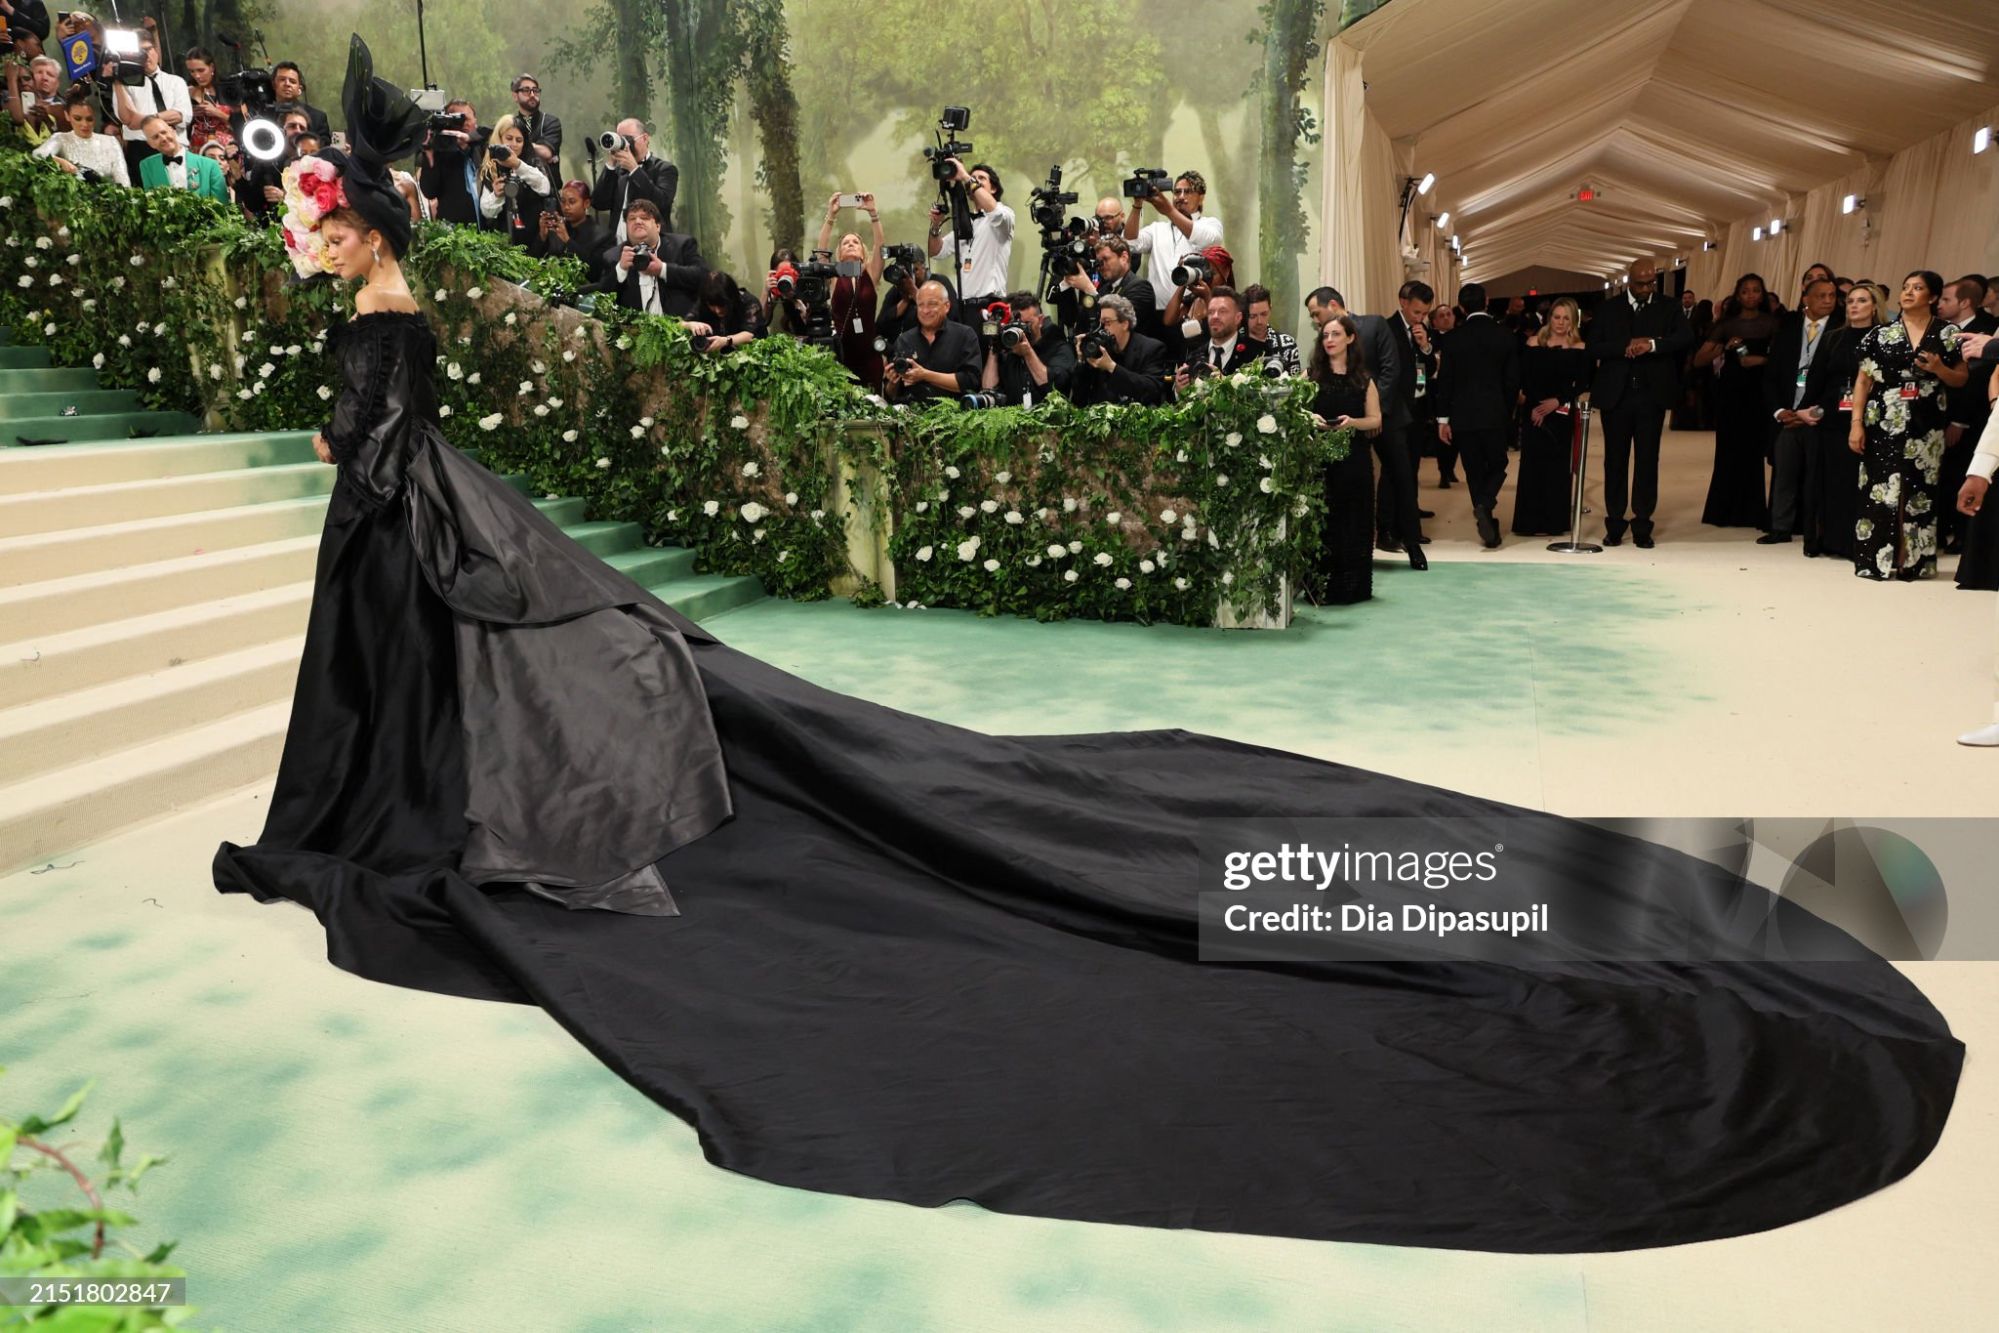 gettyimages-2151802847-2048x2048.jpg